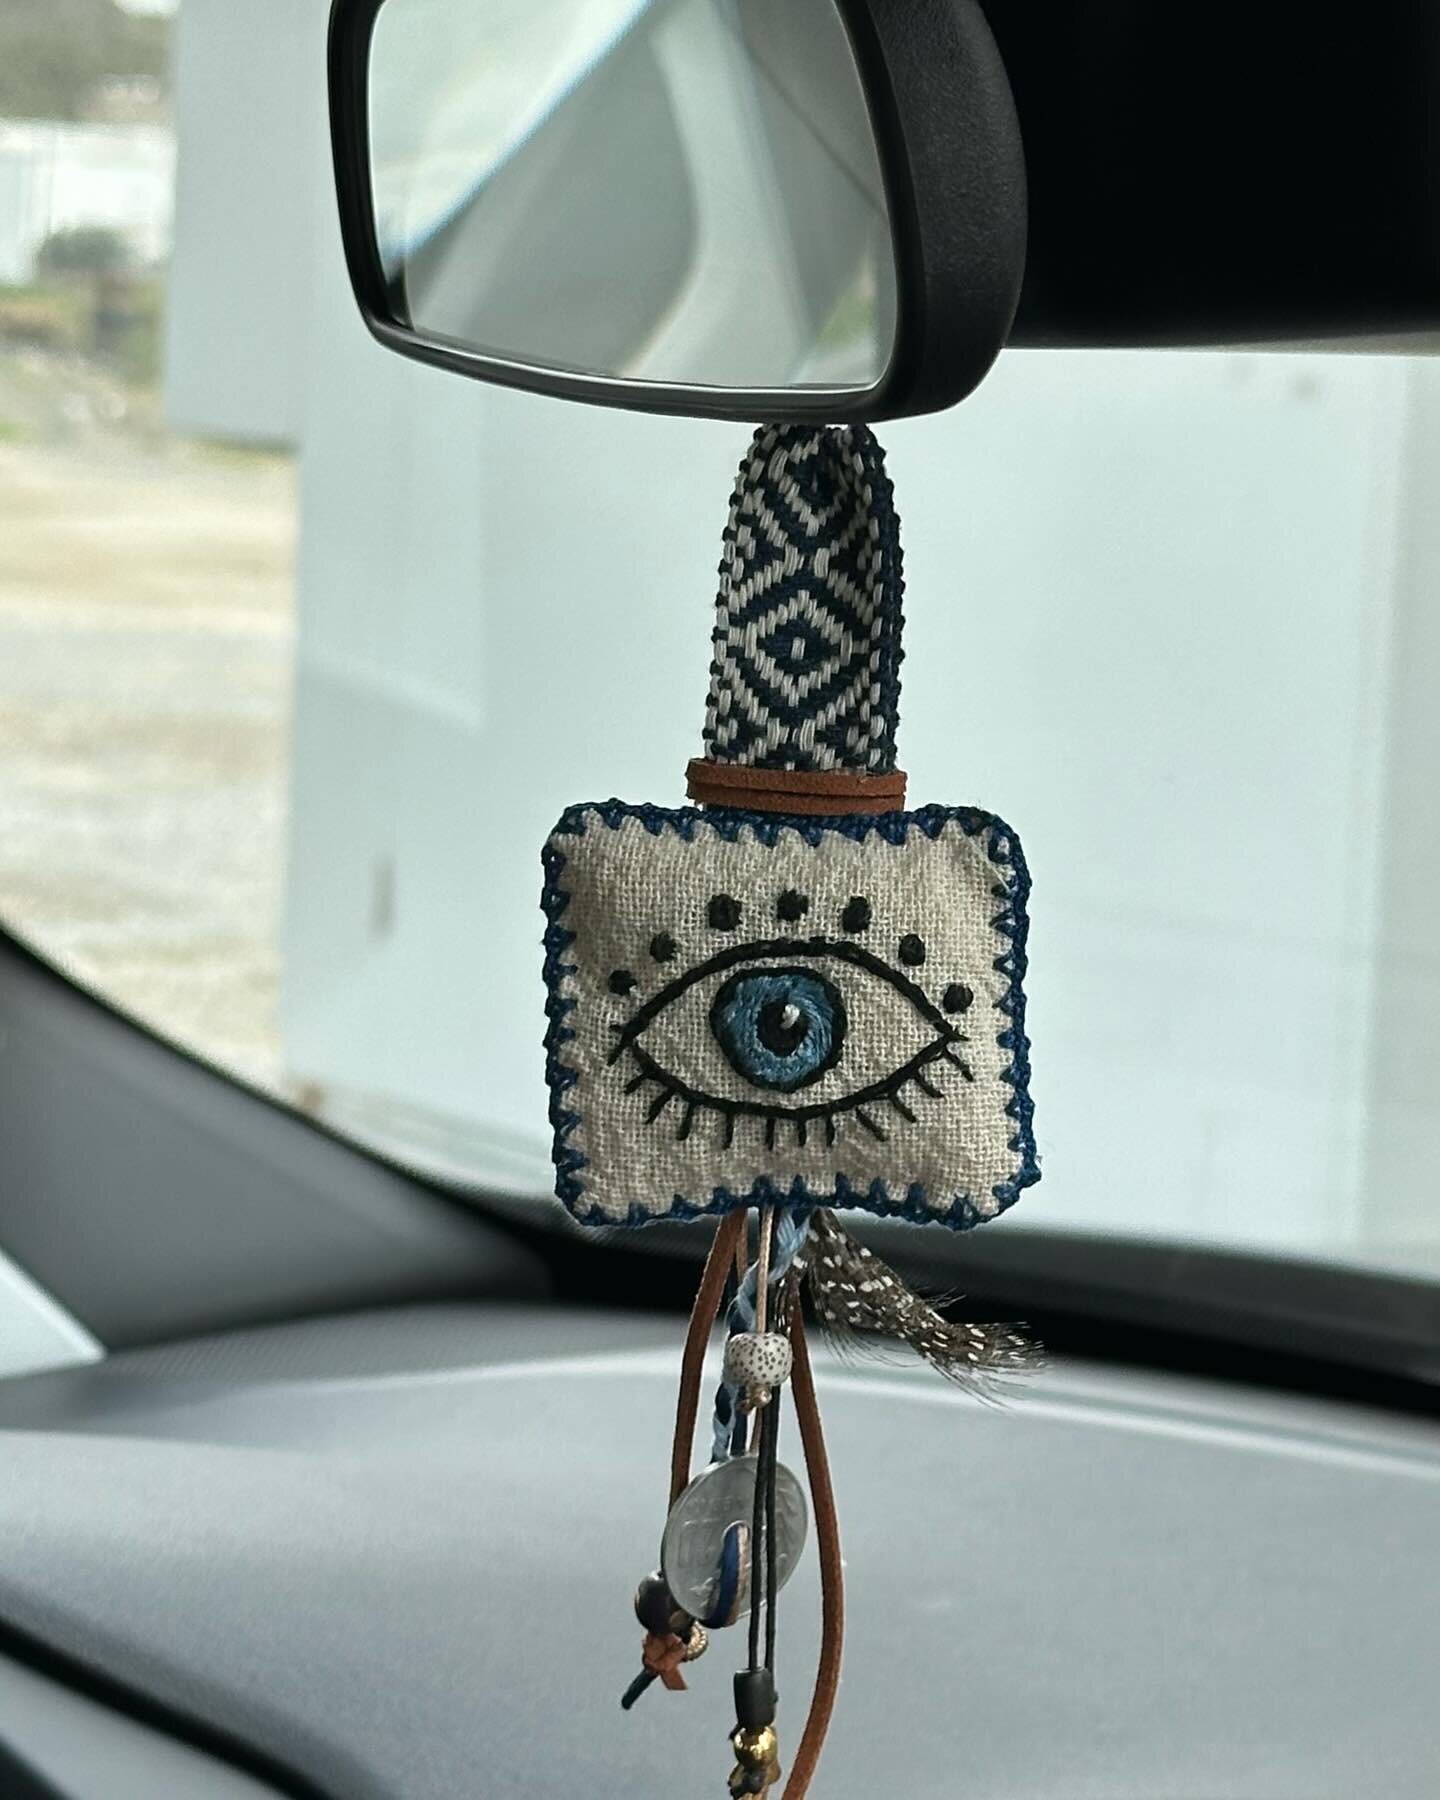 Of course you need a talisman in your new car 🧿 @lisaandthebeach made a pretty one for us! We hope for many safe km here in Crete 💙